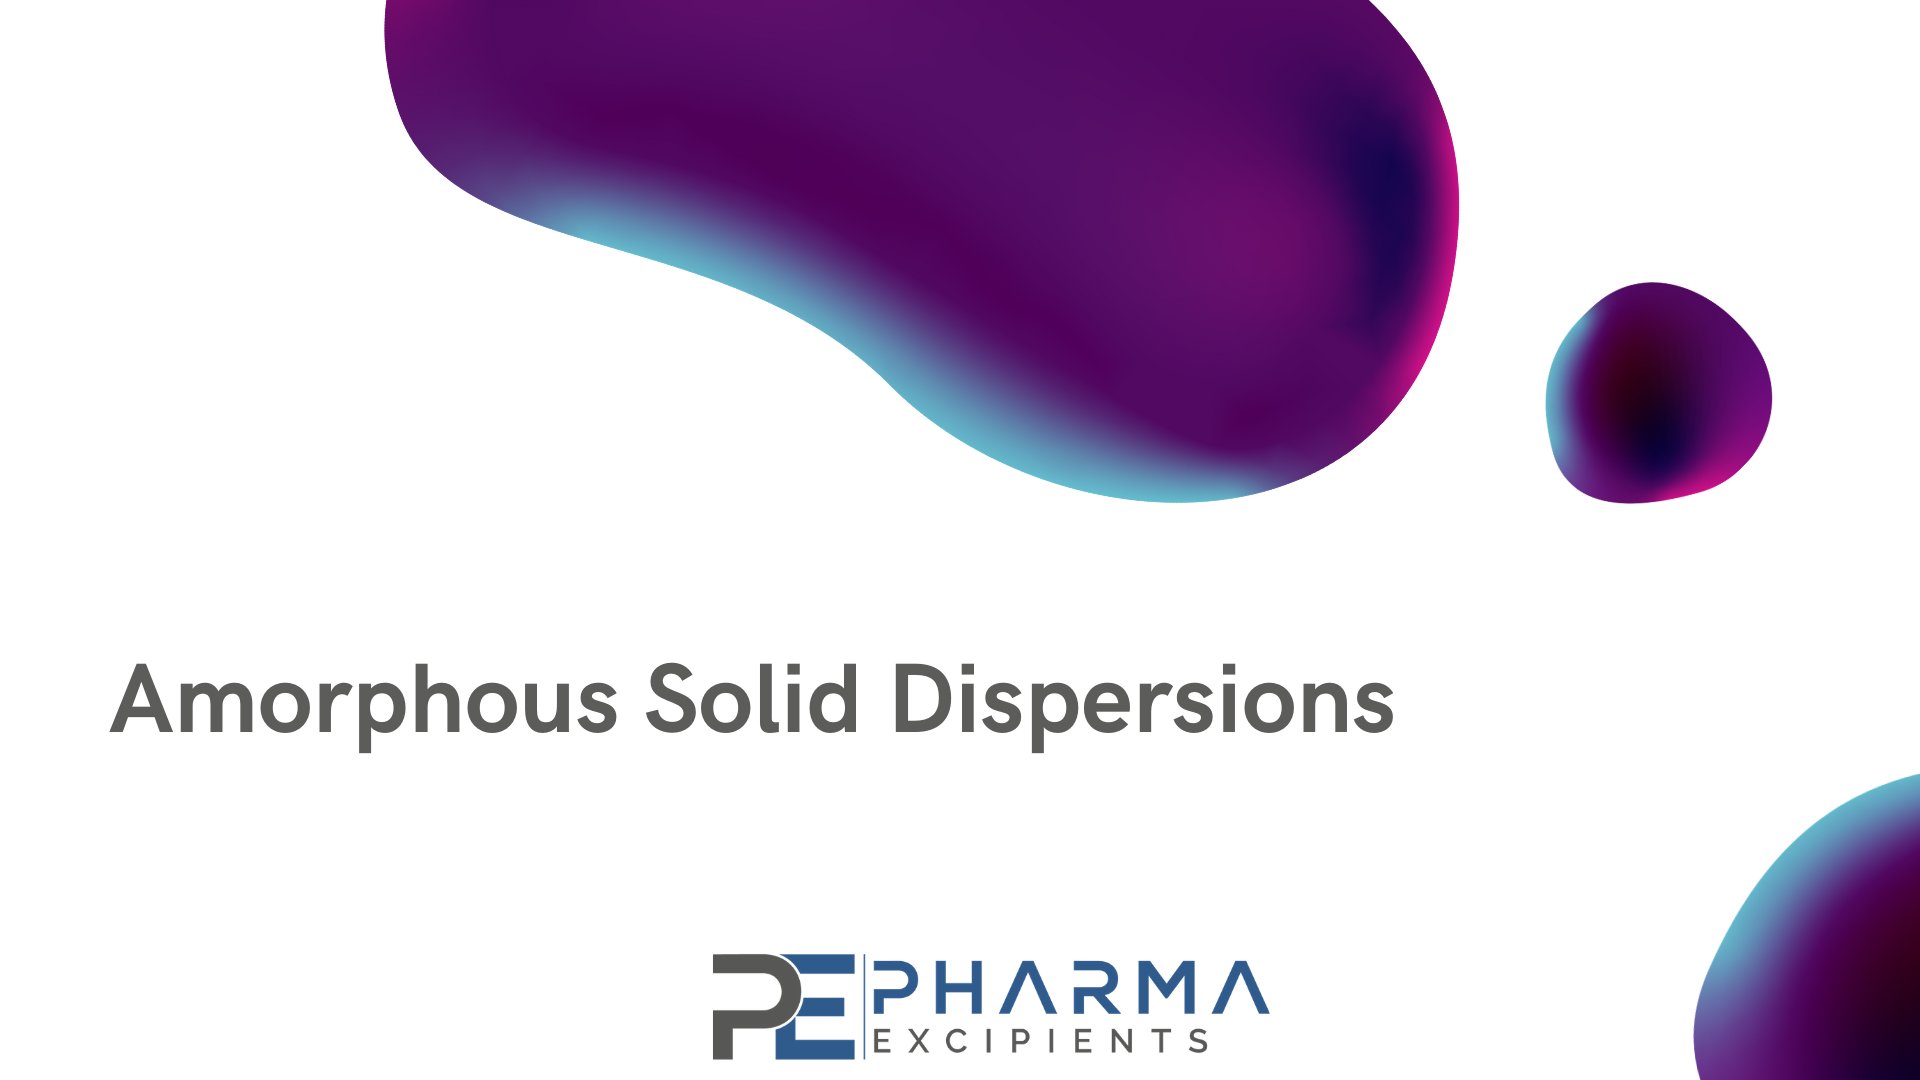 Amorphous Solid Dispersions